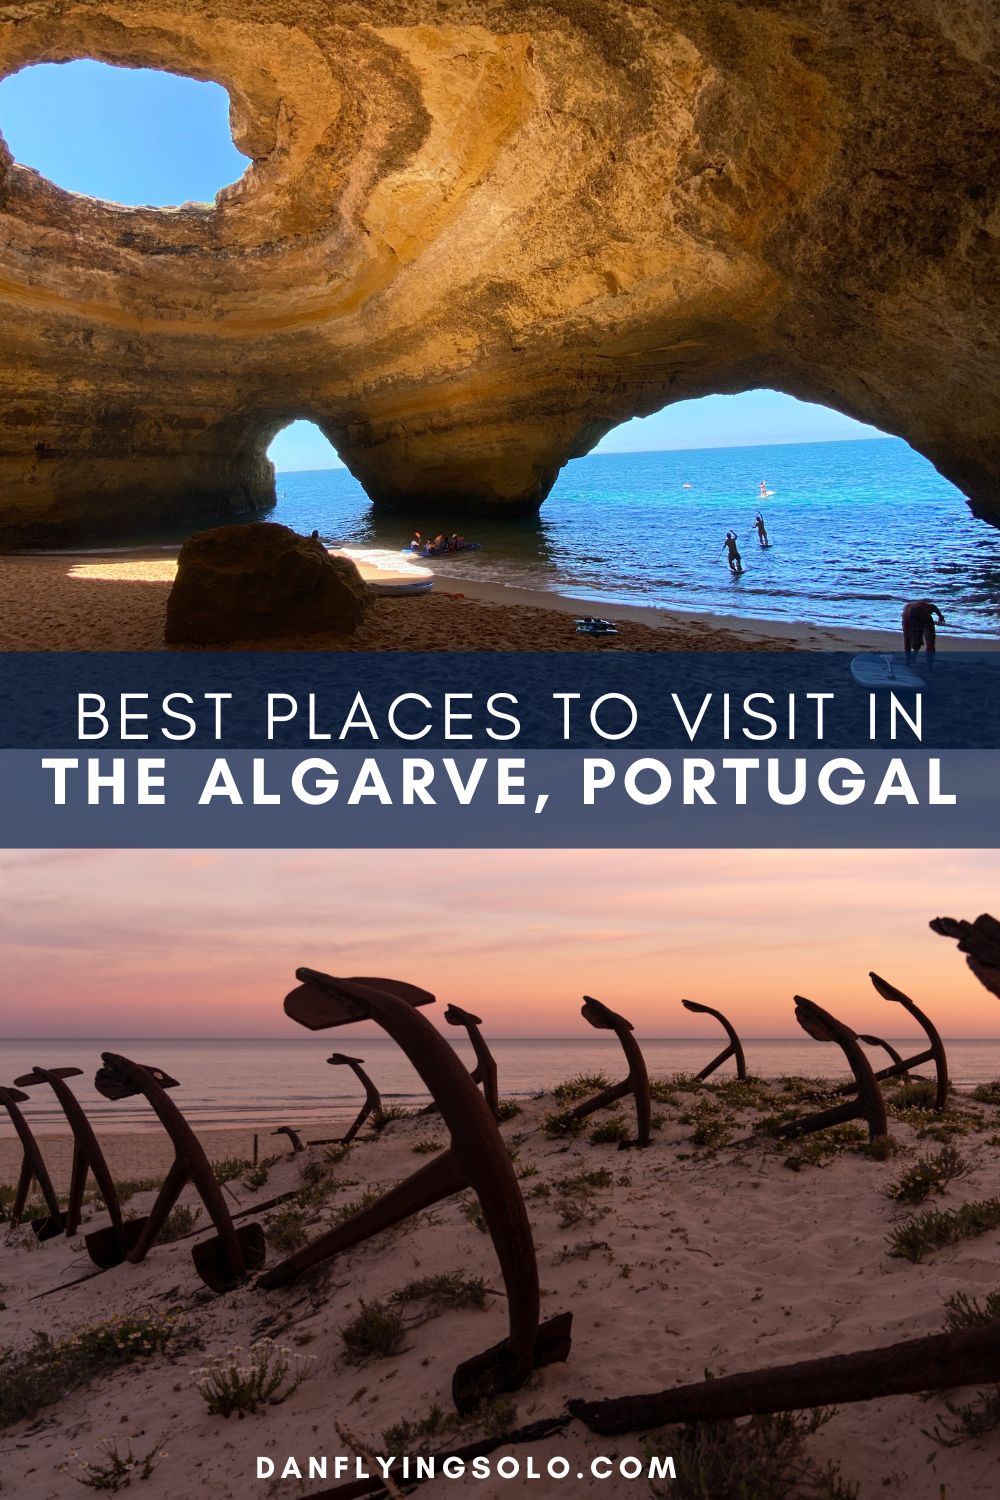 Discover the best places to visit and things to do in the Algarve. From idyllic islands and castle-crowned towns, to epic beach hikes and mountain spa-town trails.